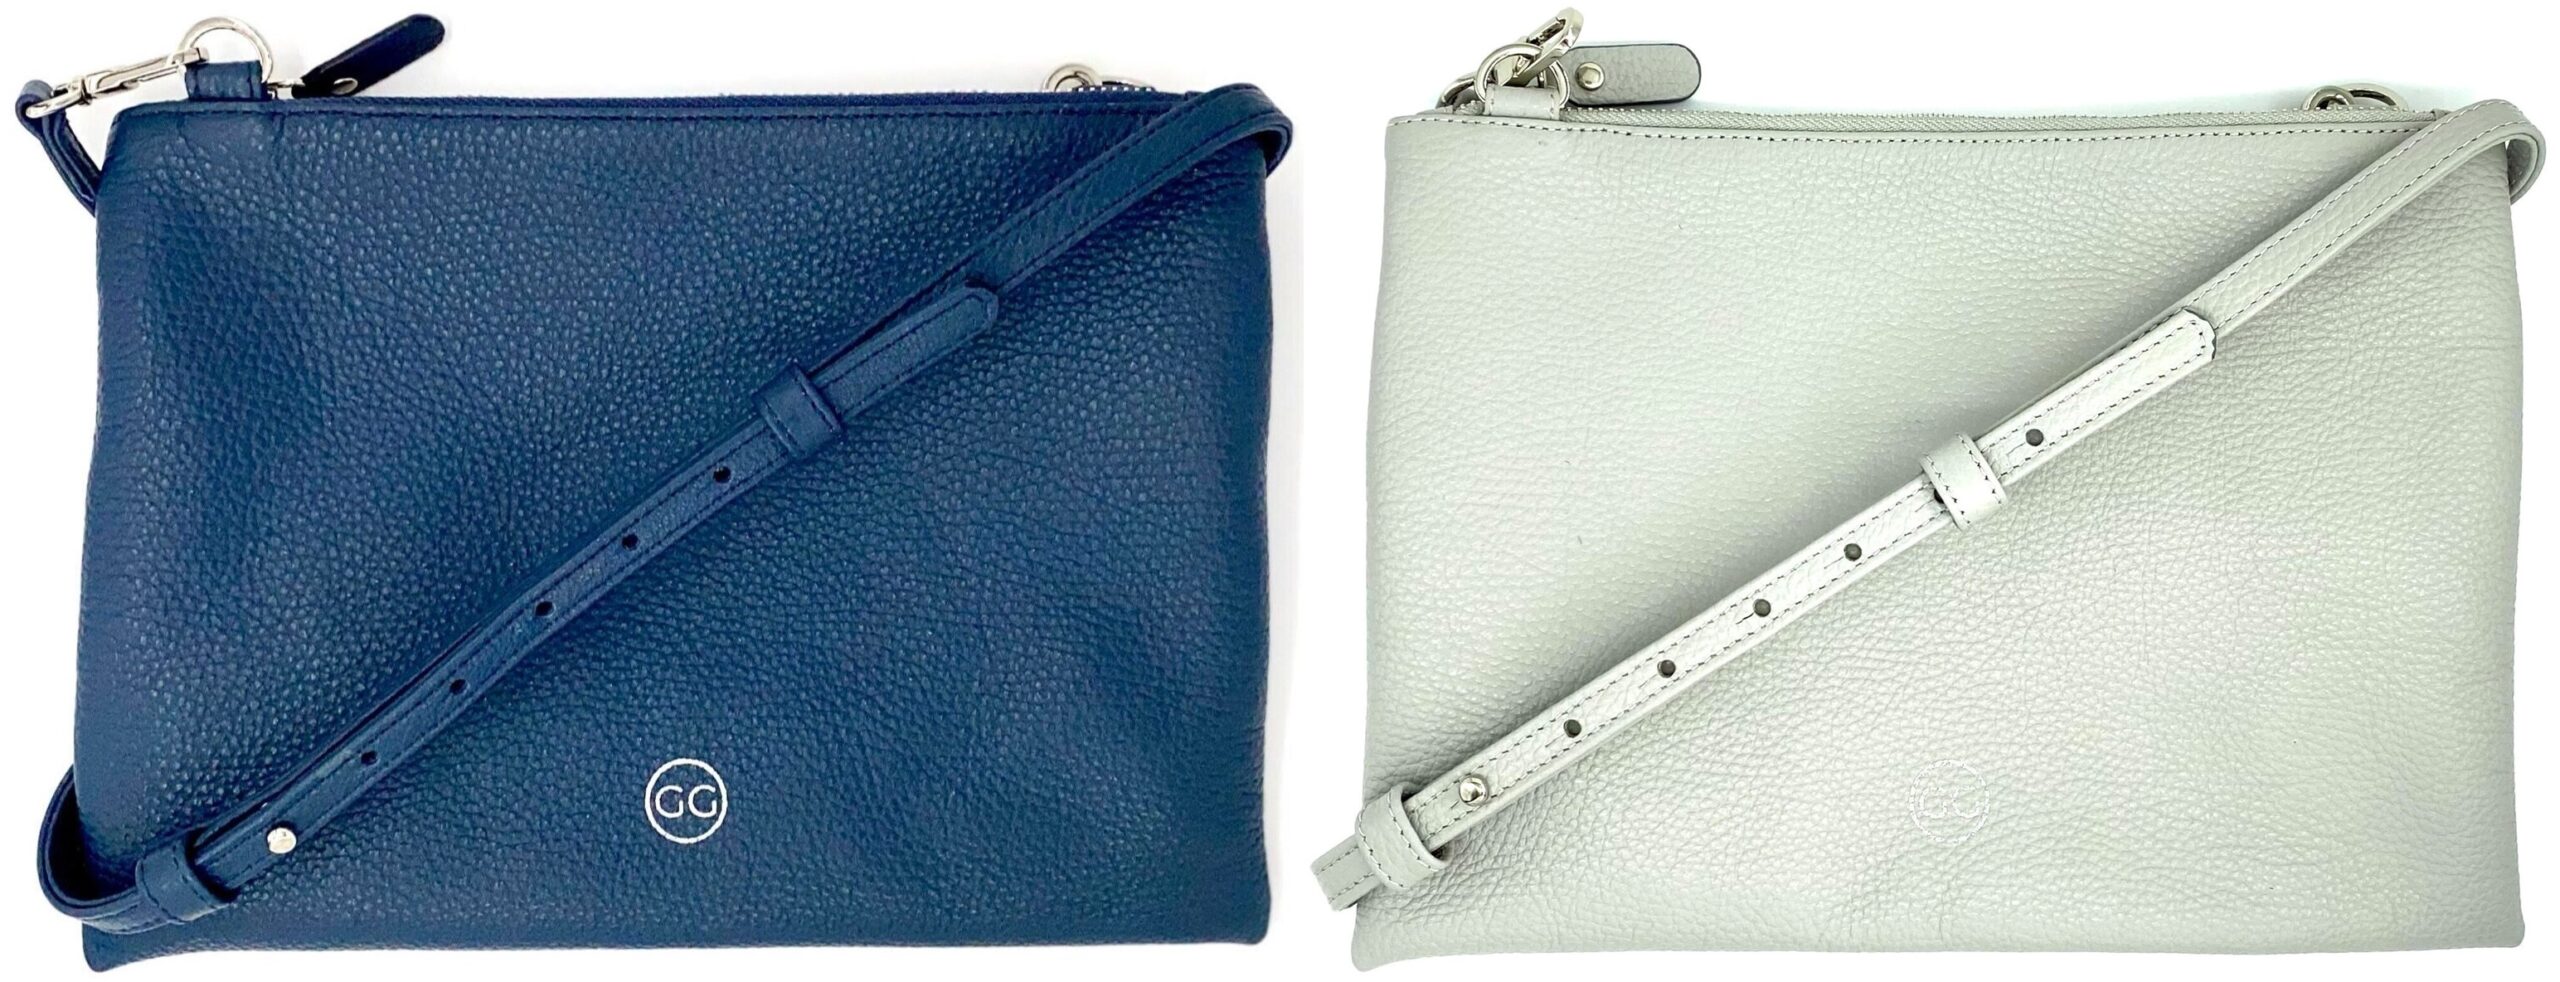 Gabrielle Ginger Handbags: Your New, Must-Have Fall Accessories